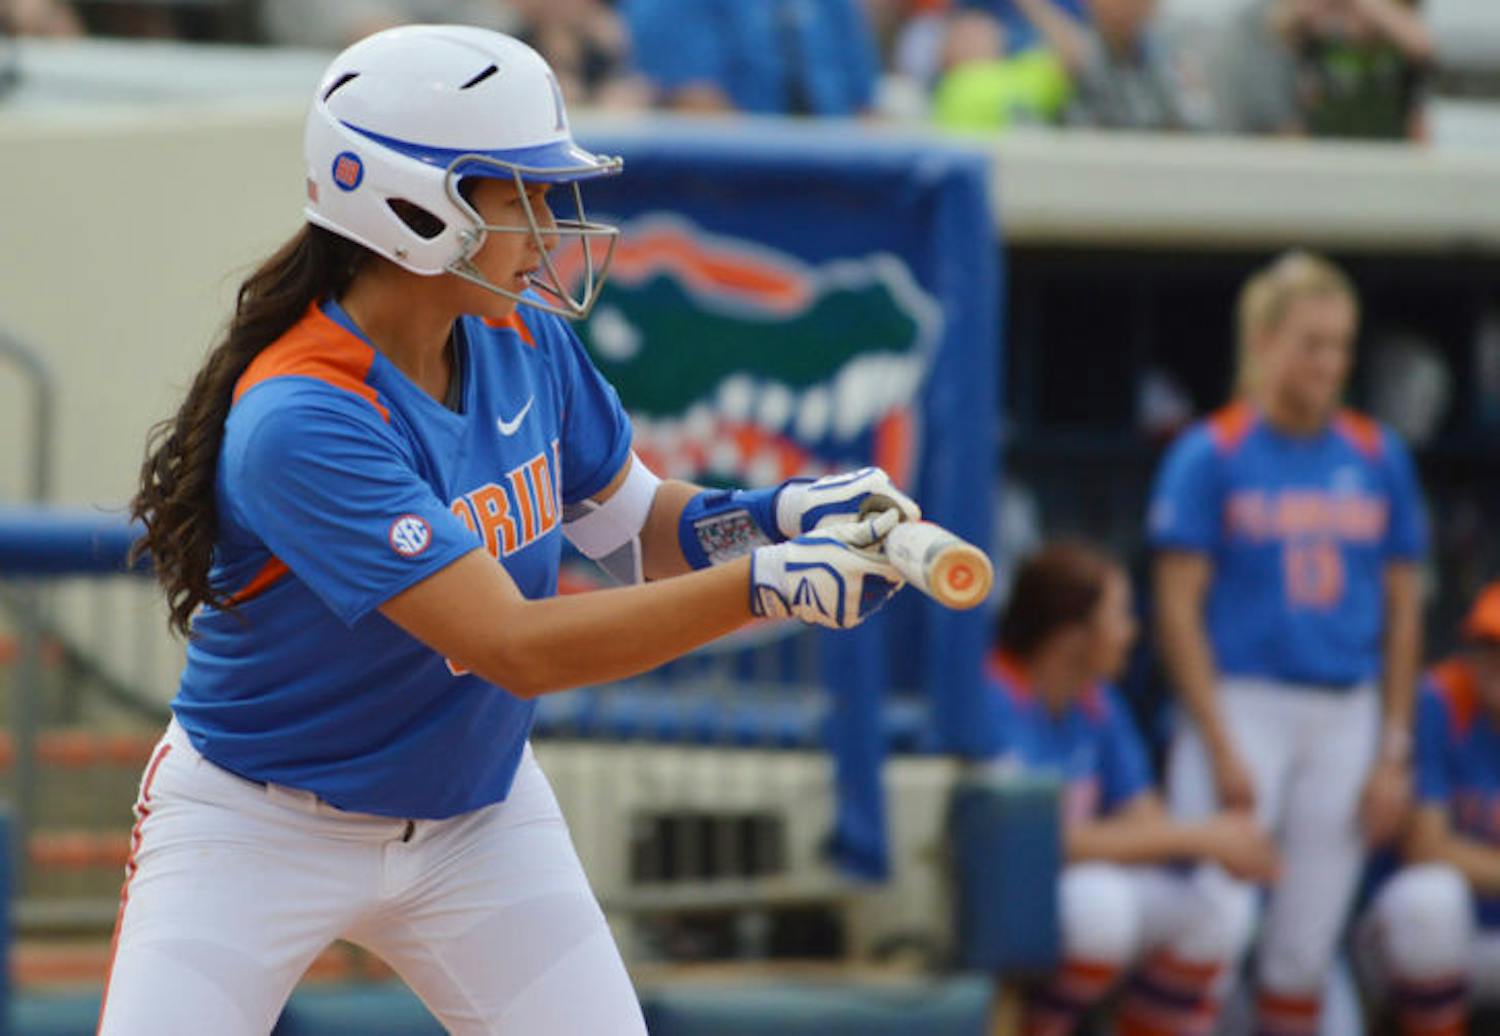 Kathlyn Medina shows bunt during Florida’s 7-6 win against Auburn on Saturday at Katie Seashole Pressly Stadium. Medina rejoined the lineup against Auburn after sitting out 15 games.